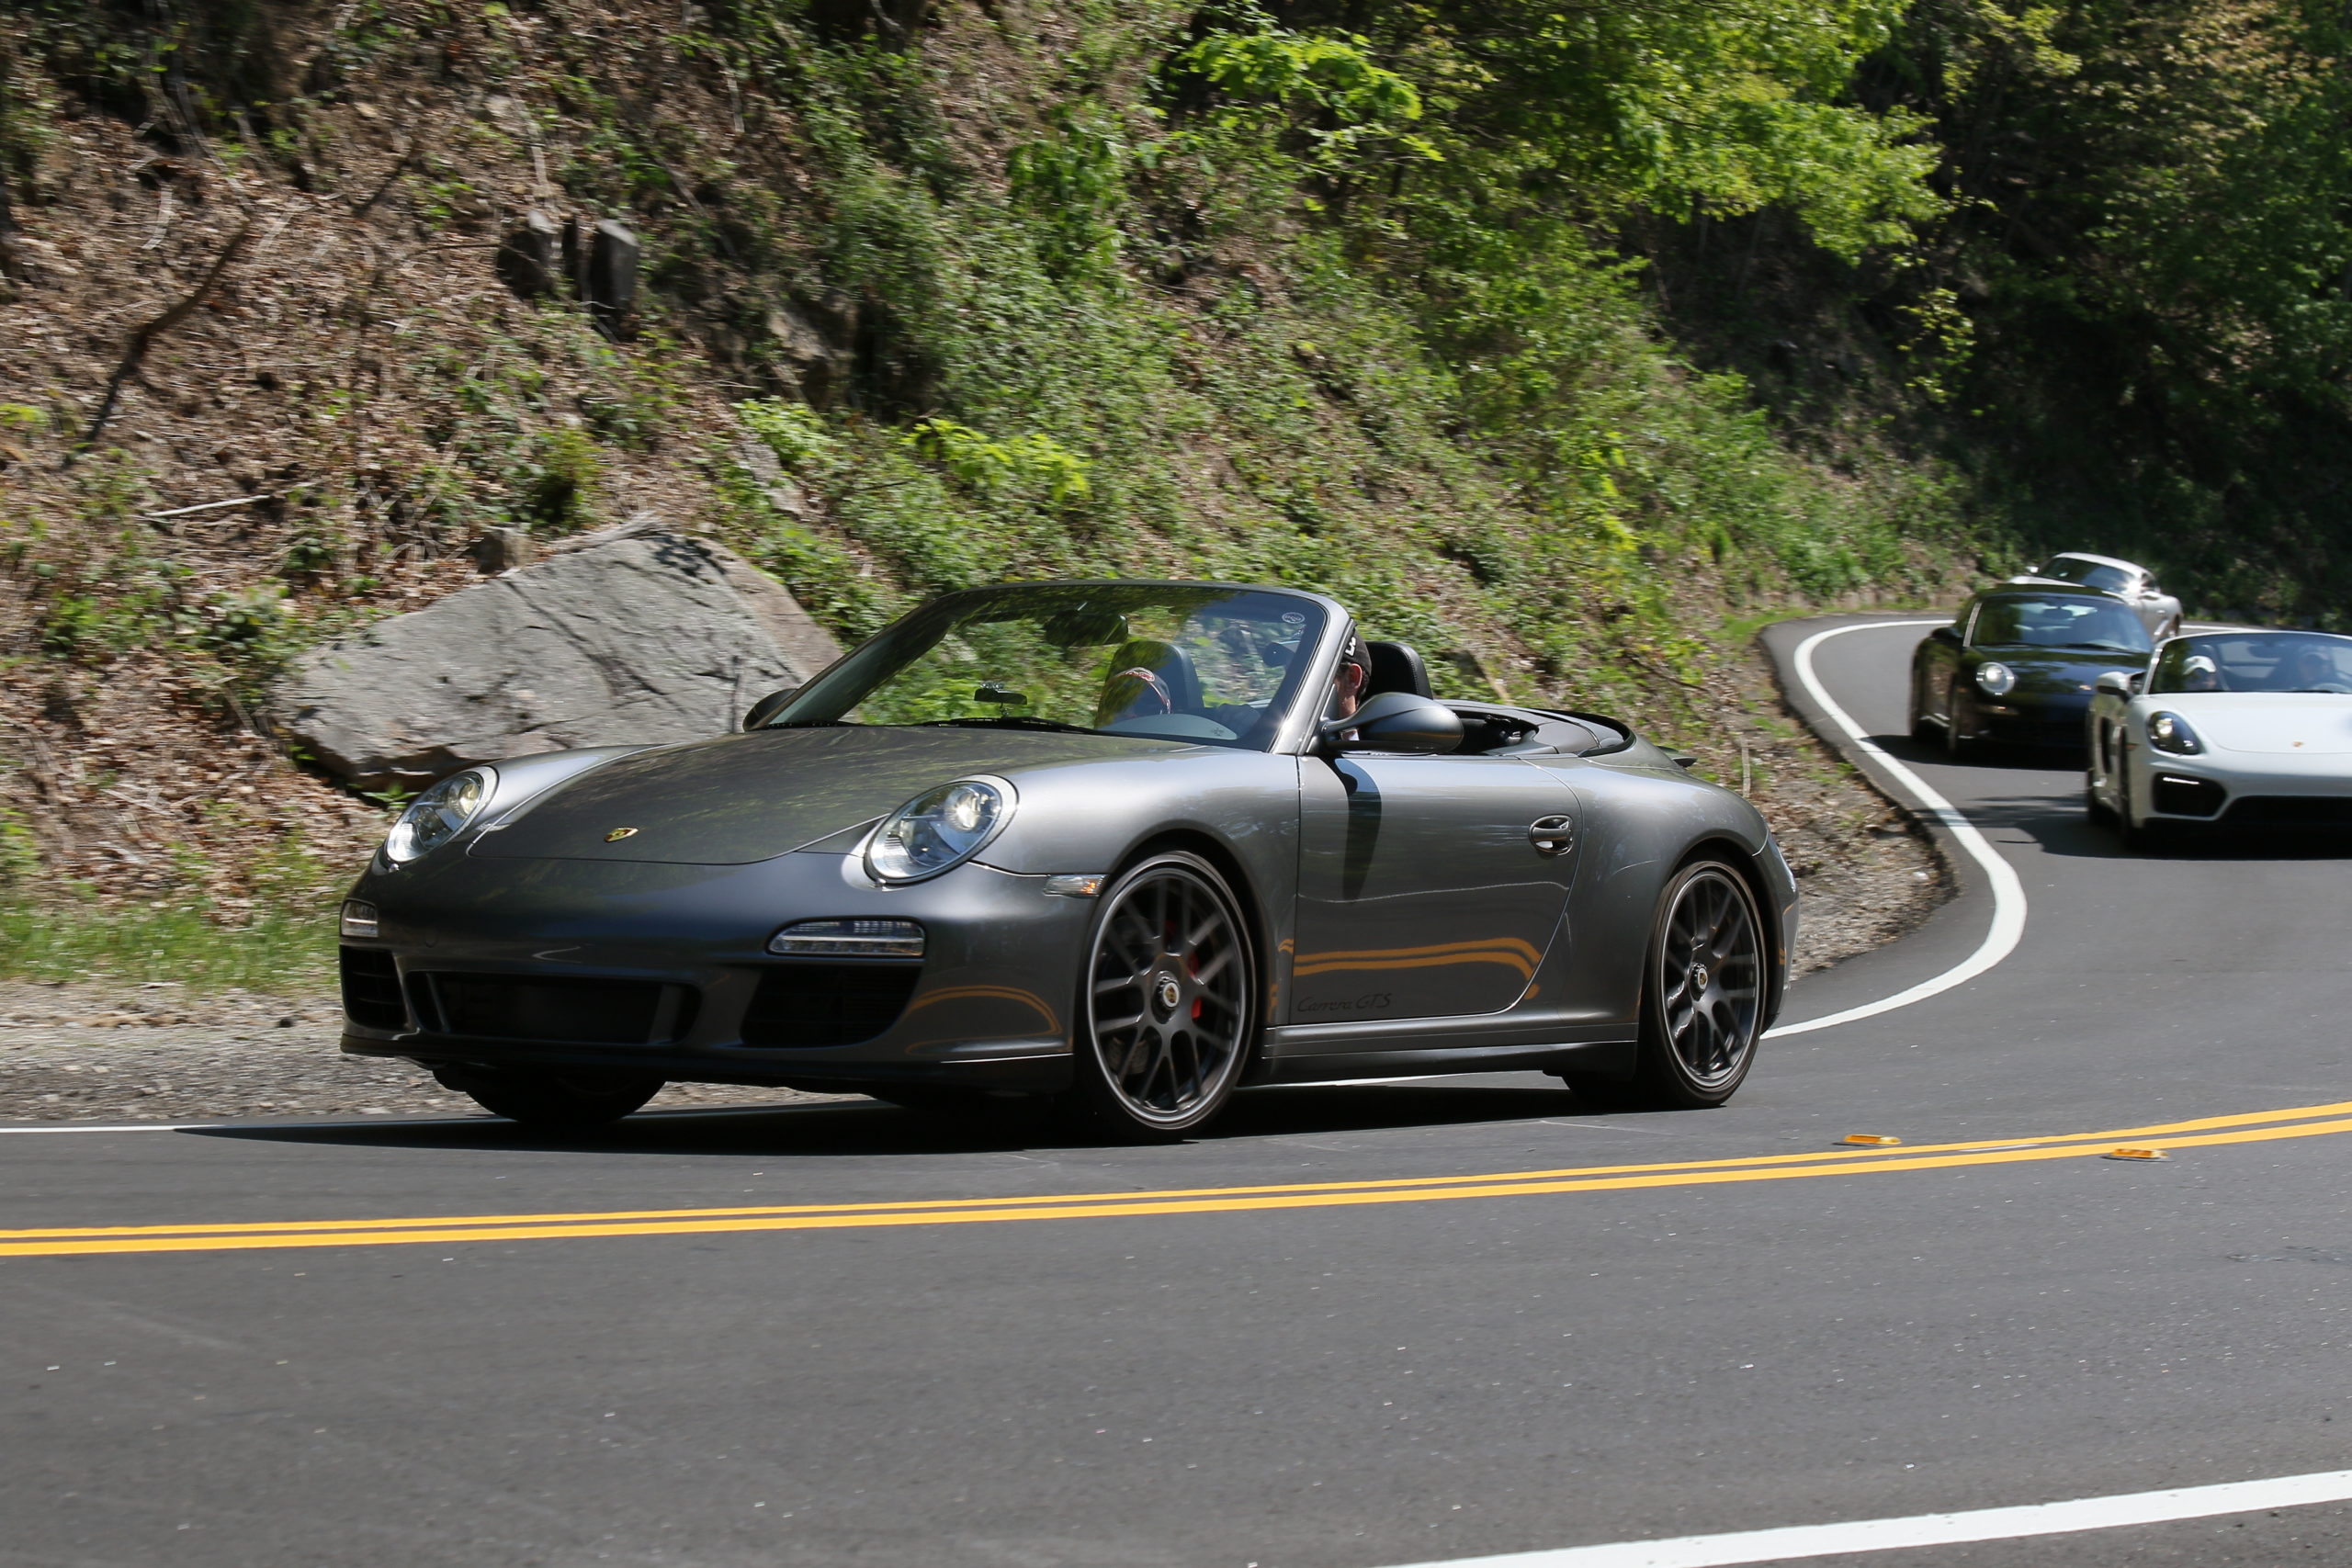 Enjoying a drive in a 2011 997 Carrera GTS Cabriolet with the top down.